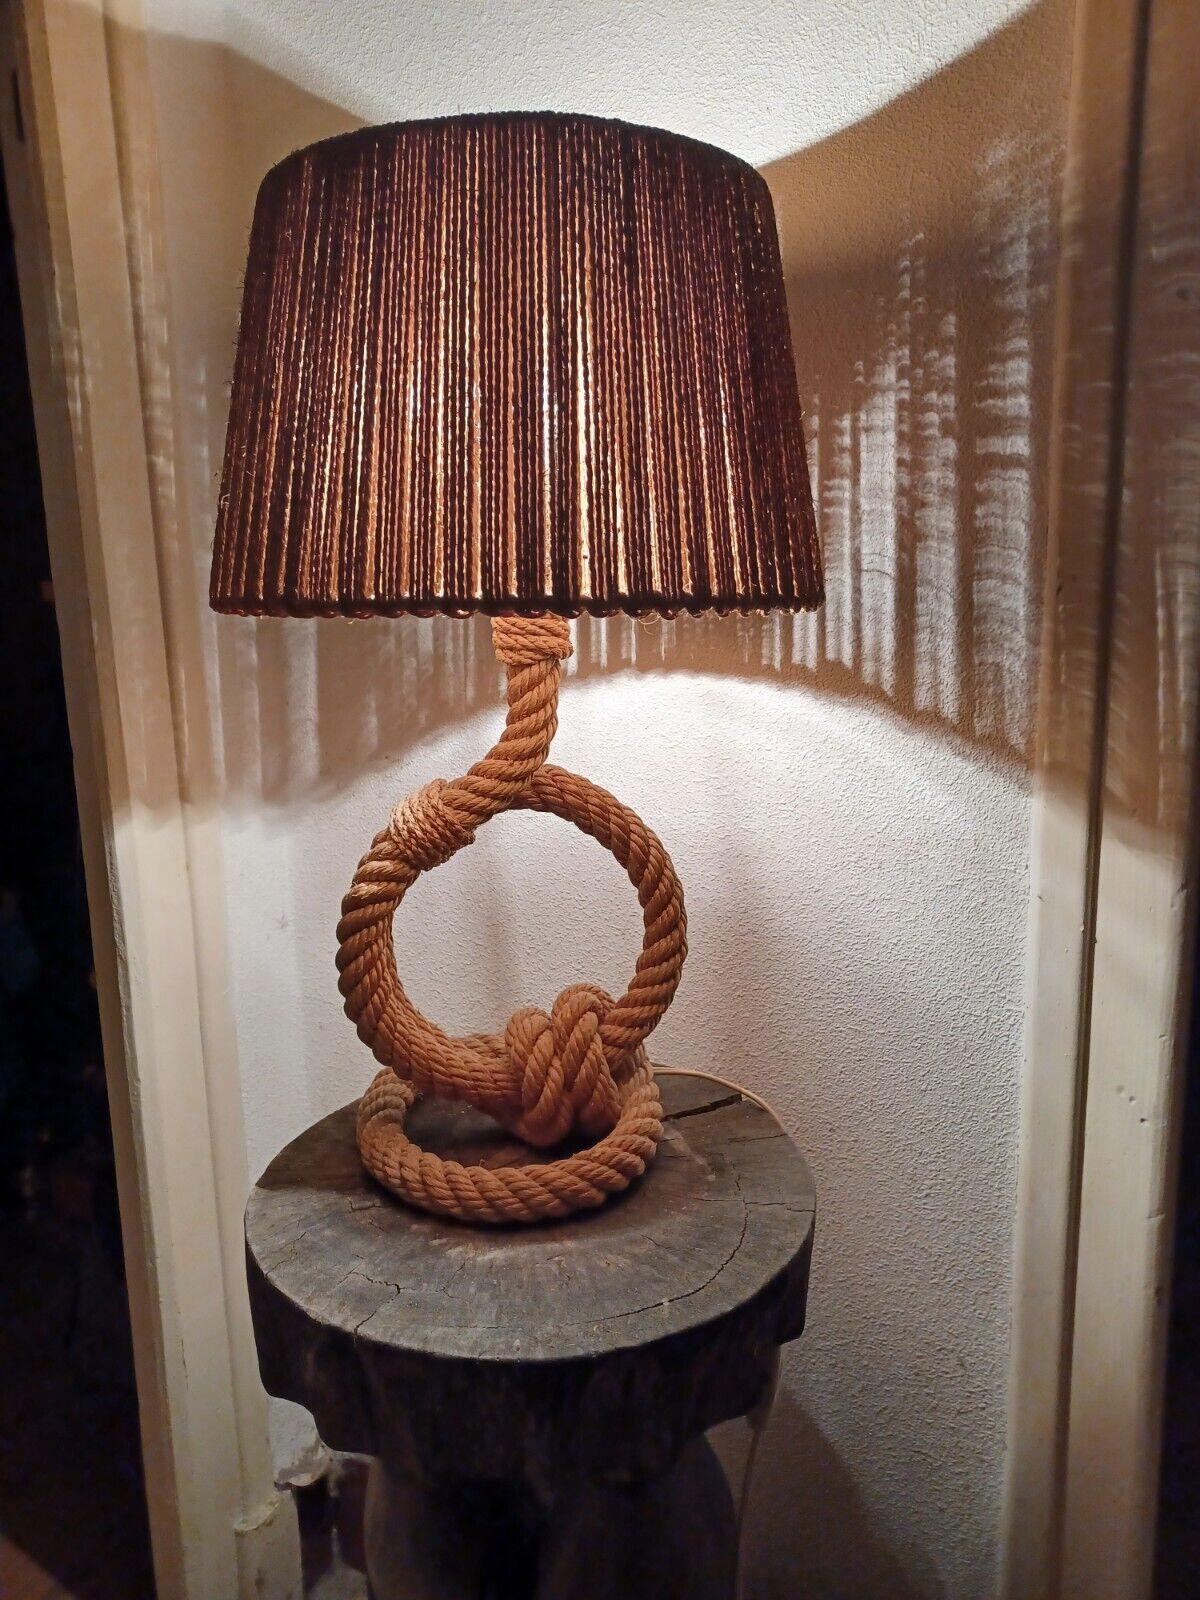 Audoux Minet rope table lamp, 1950 by Adrien Audoux and Frida Minet.
original lampshade
height of foot only 29 cm